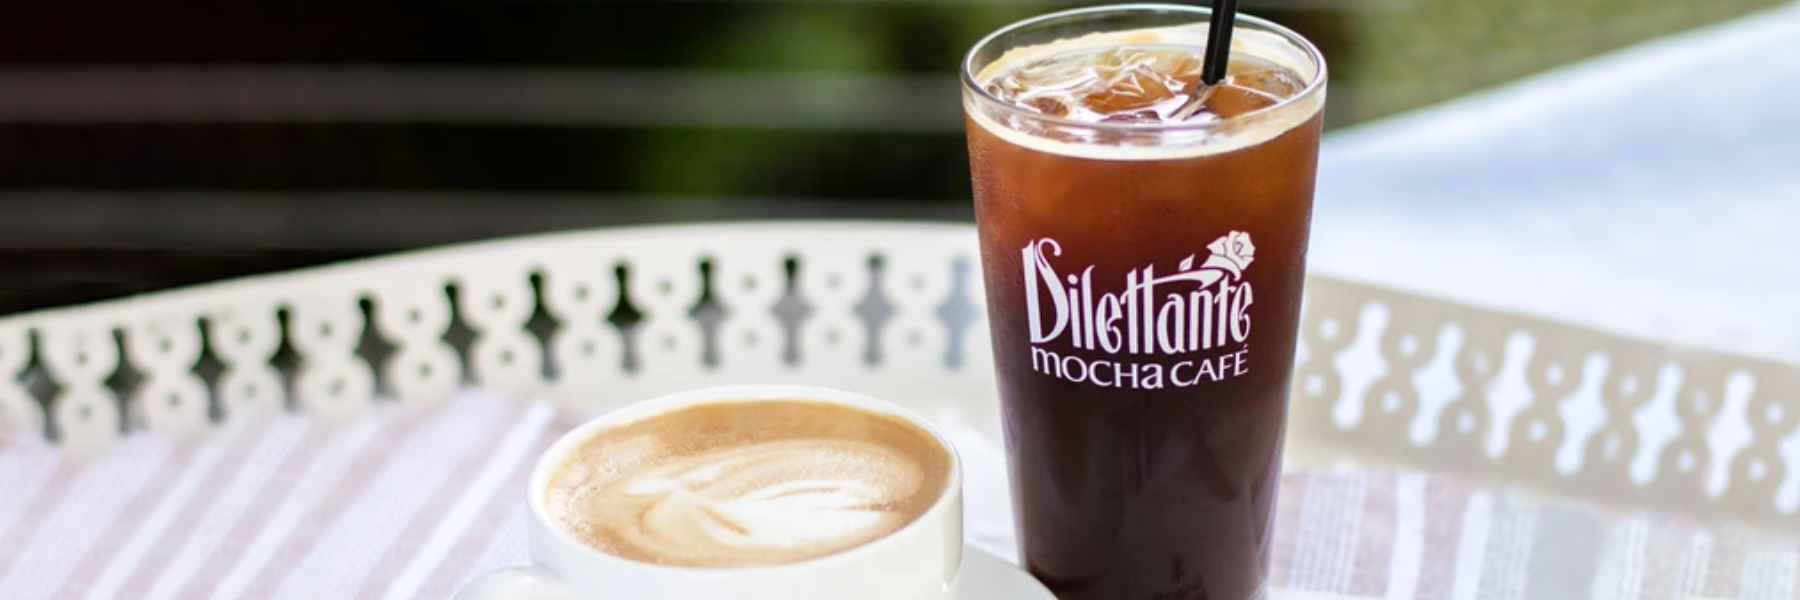 Dilettante Chocolates Cold Brewed Coffee beside a latte